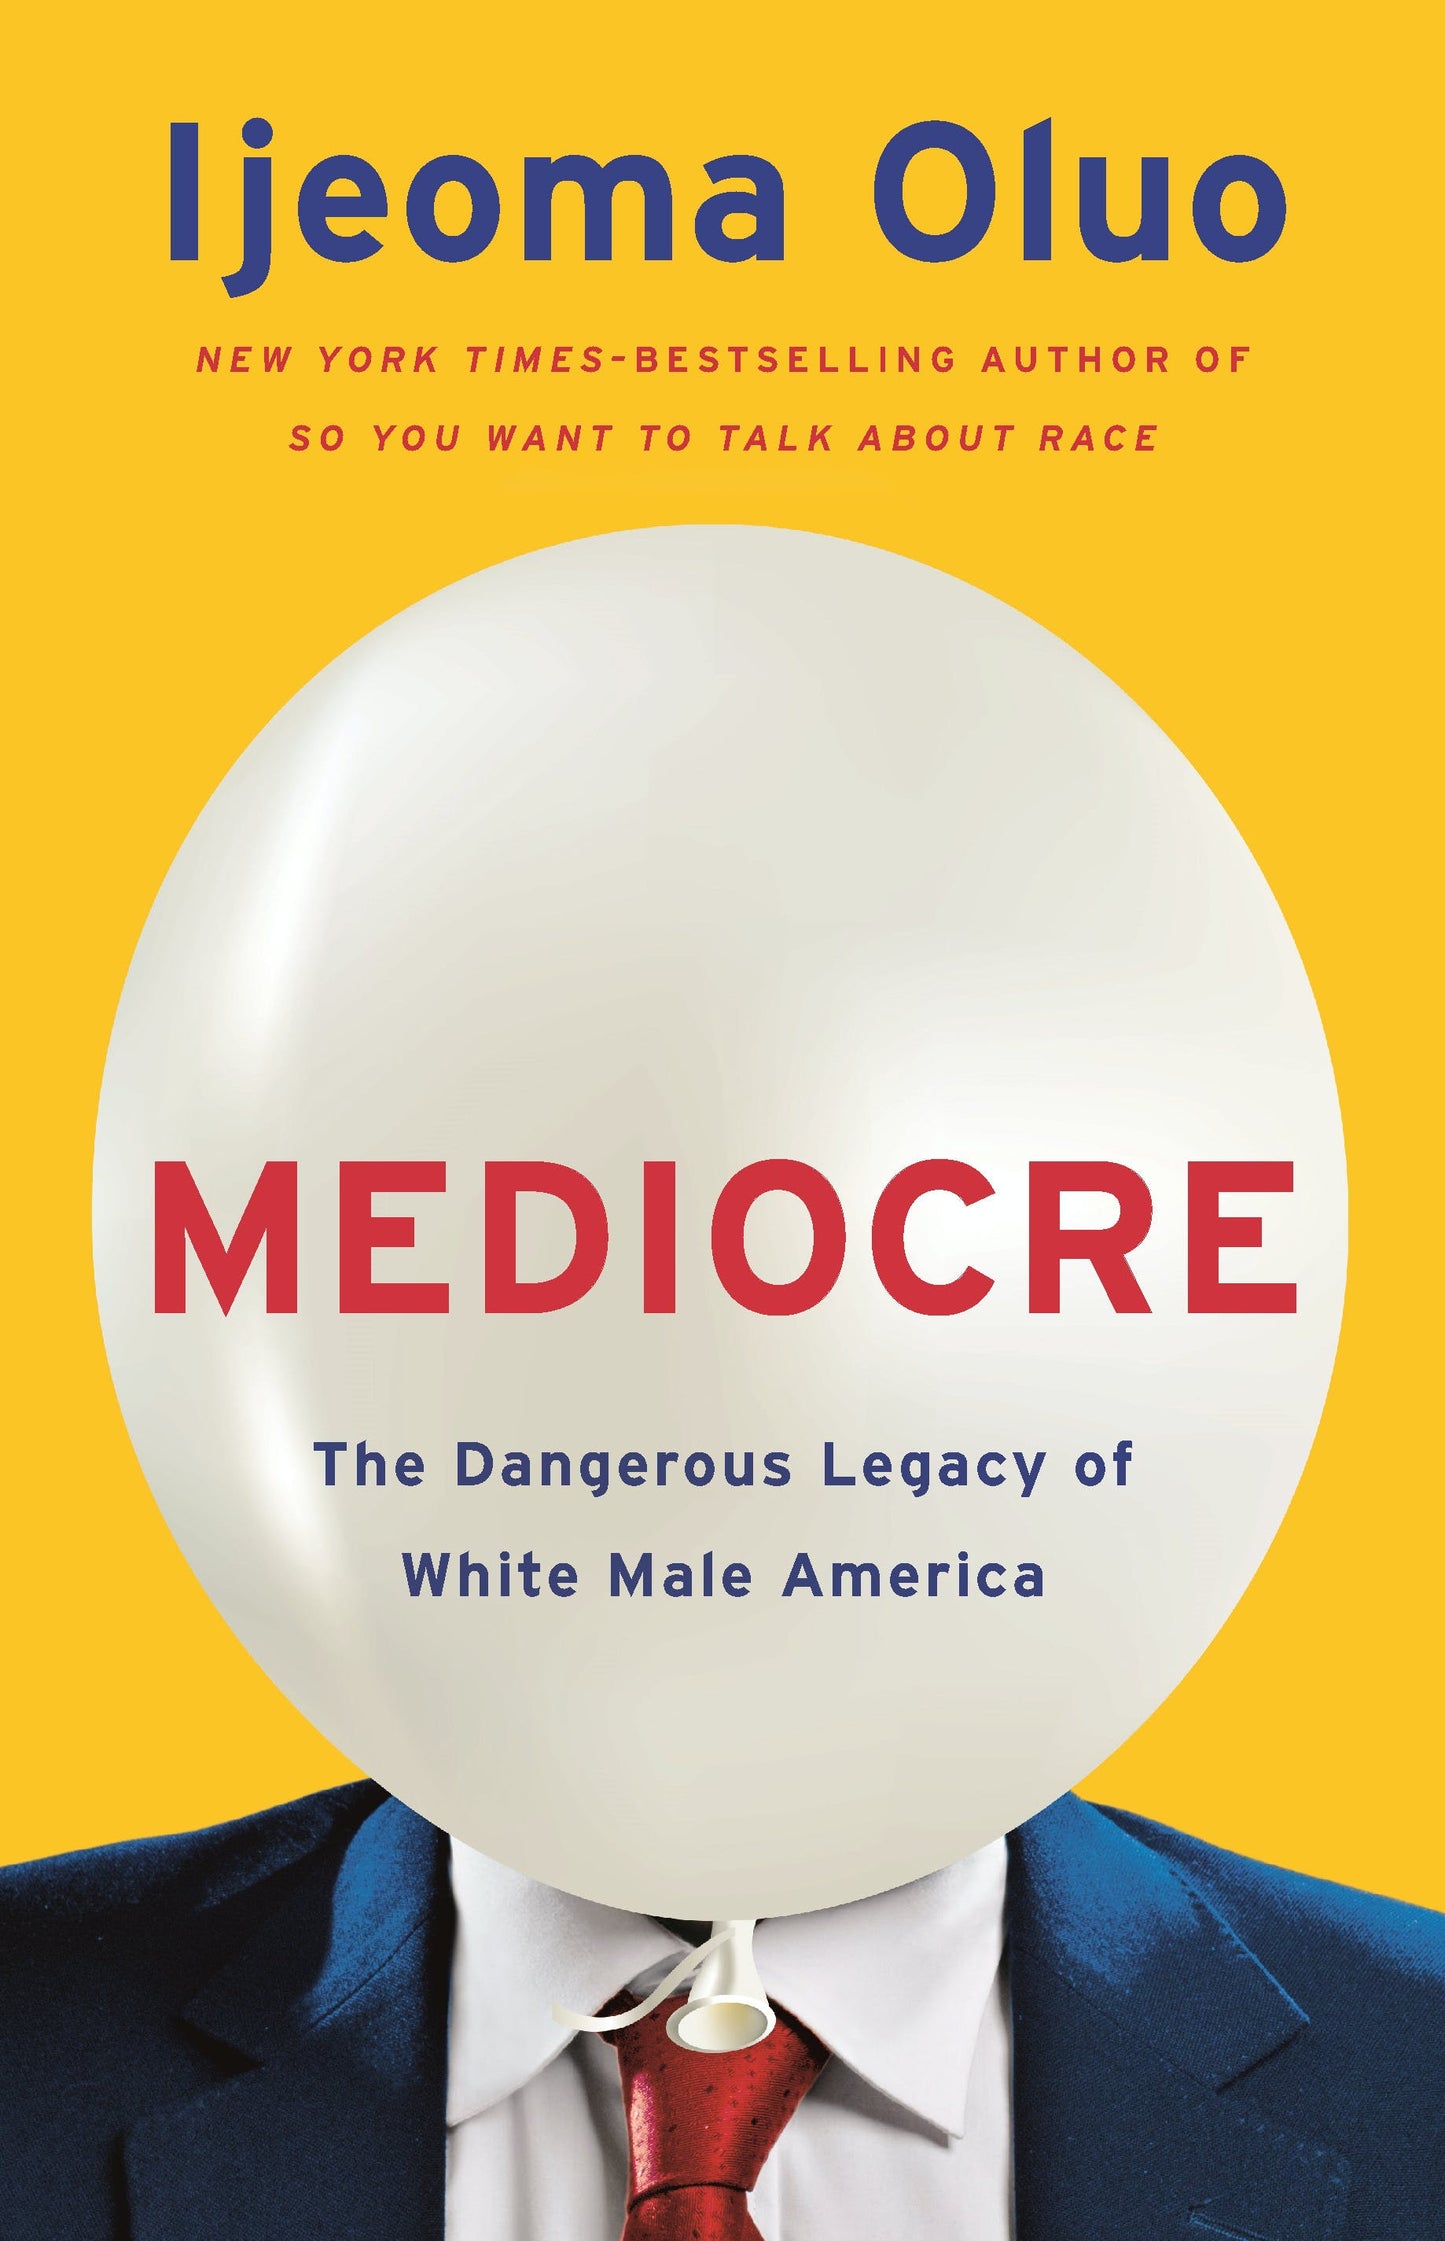 Mediocre // The Dangerous Legacy of White Male America